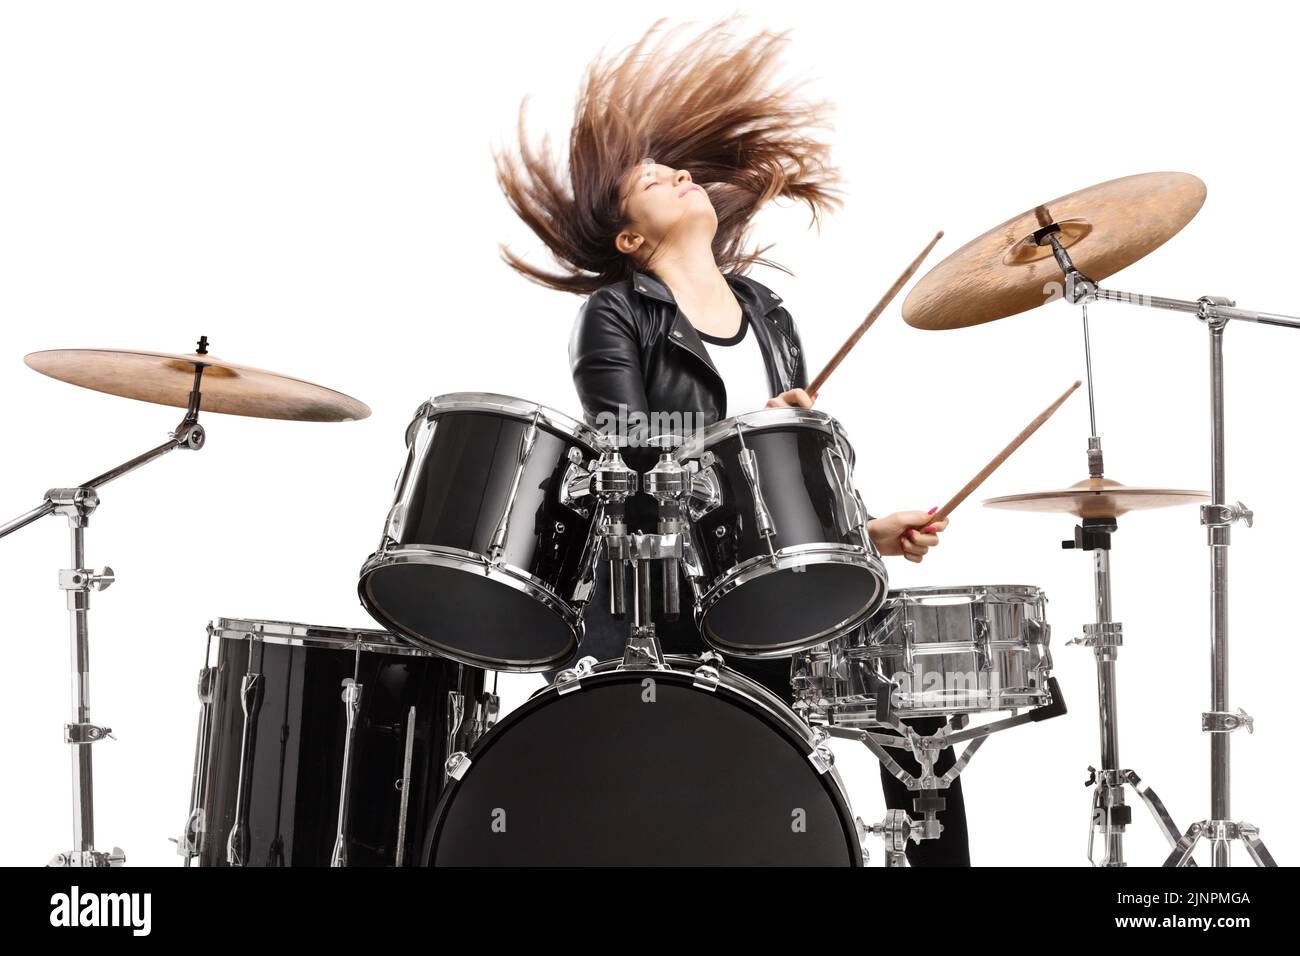 Young female drummer throwing her hair and playing drums isolated on white background Stock Photo